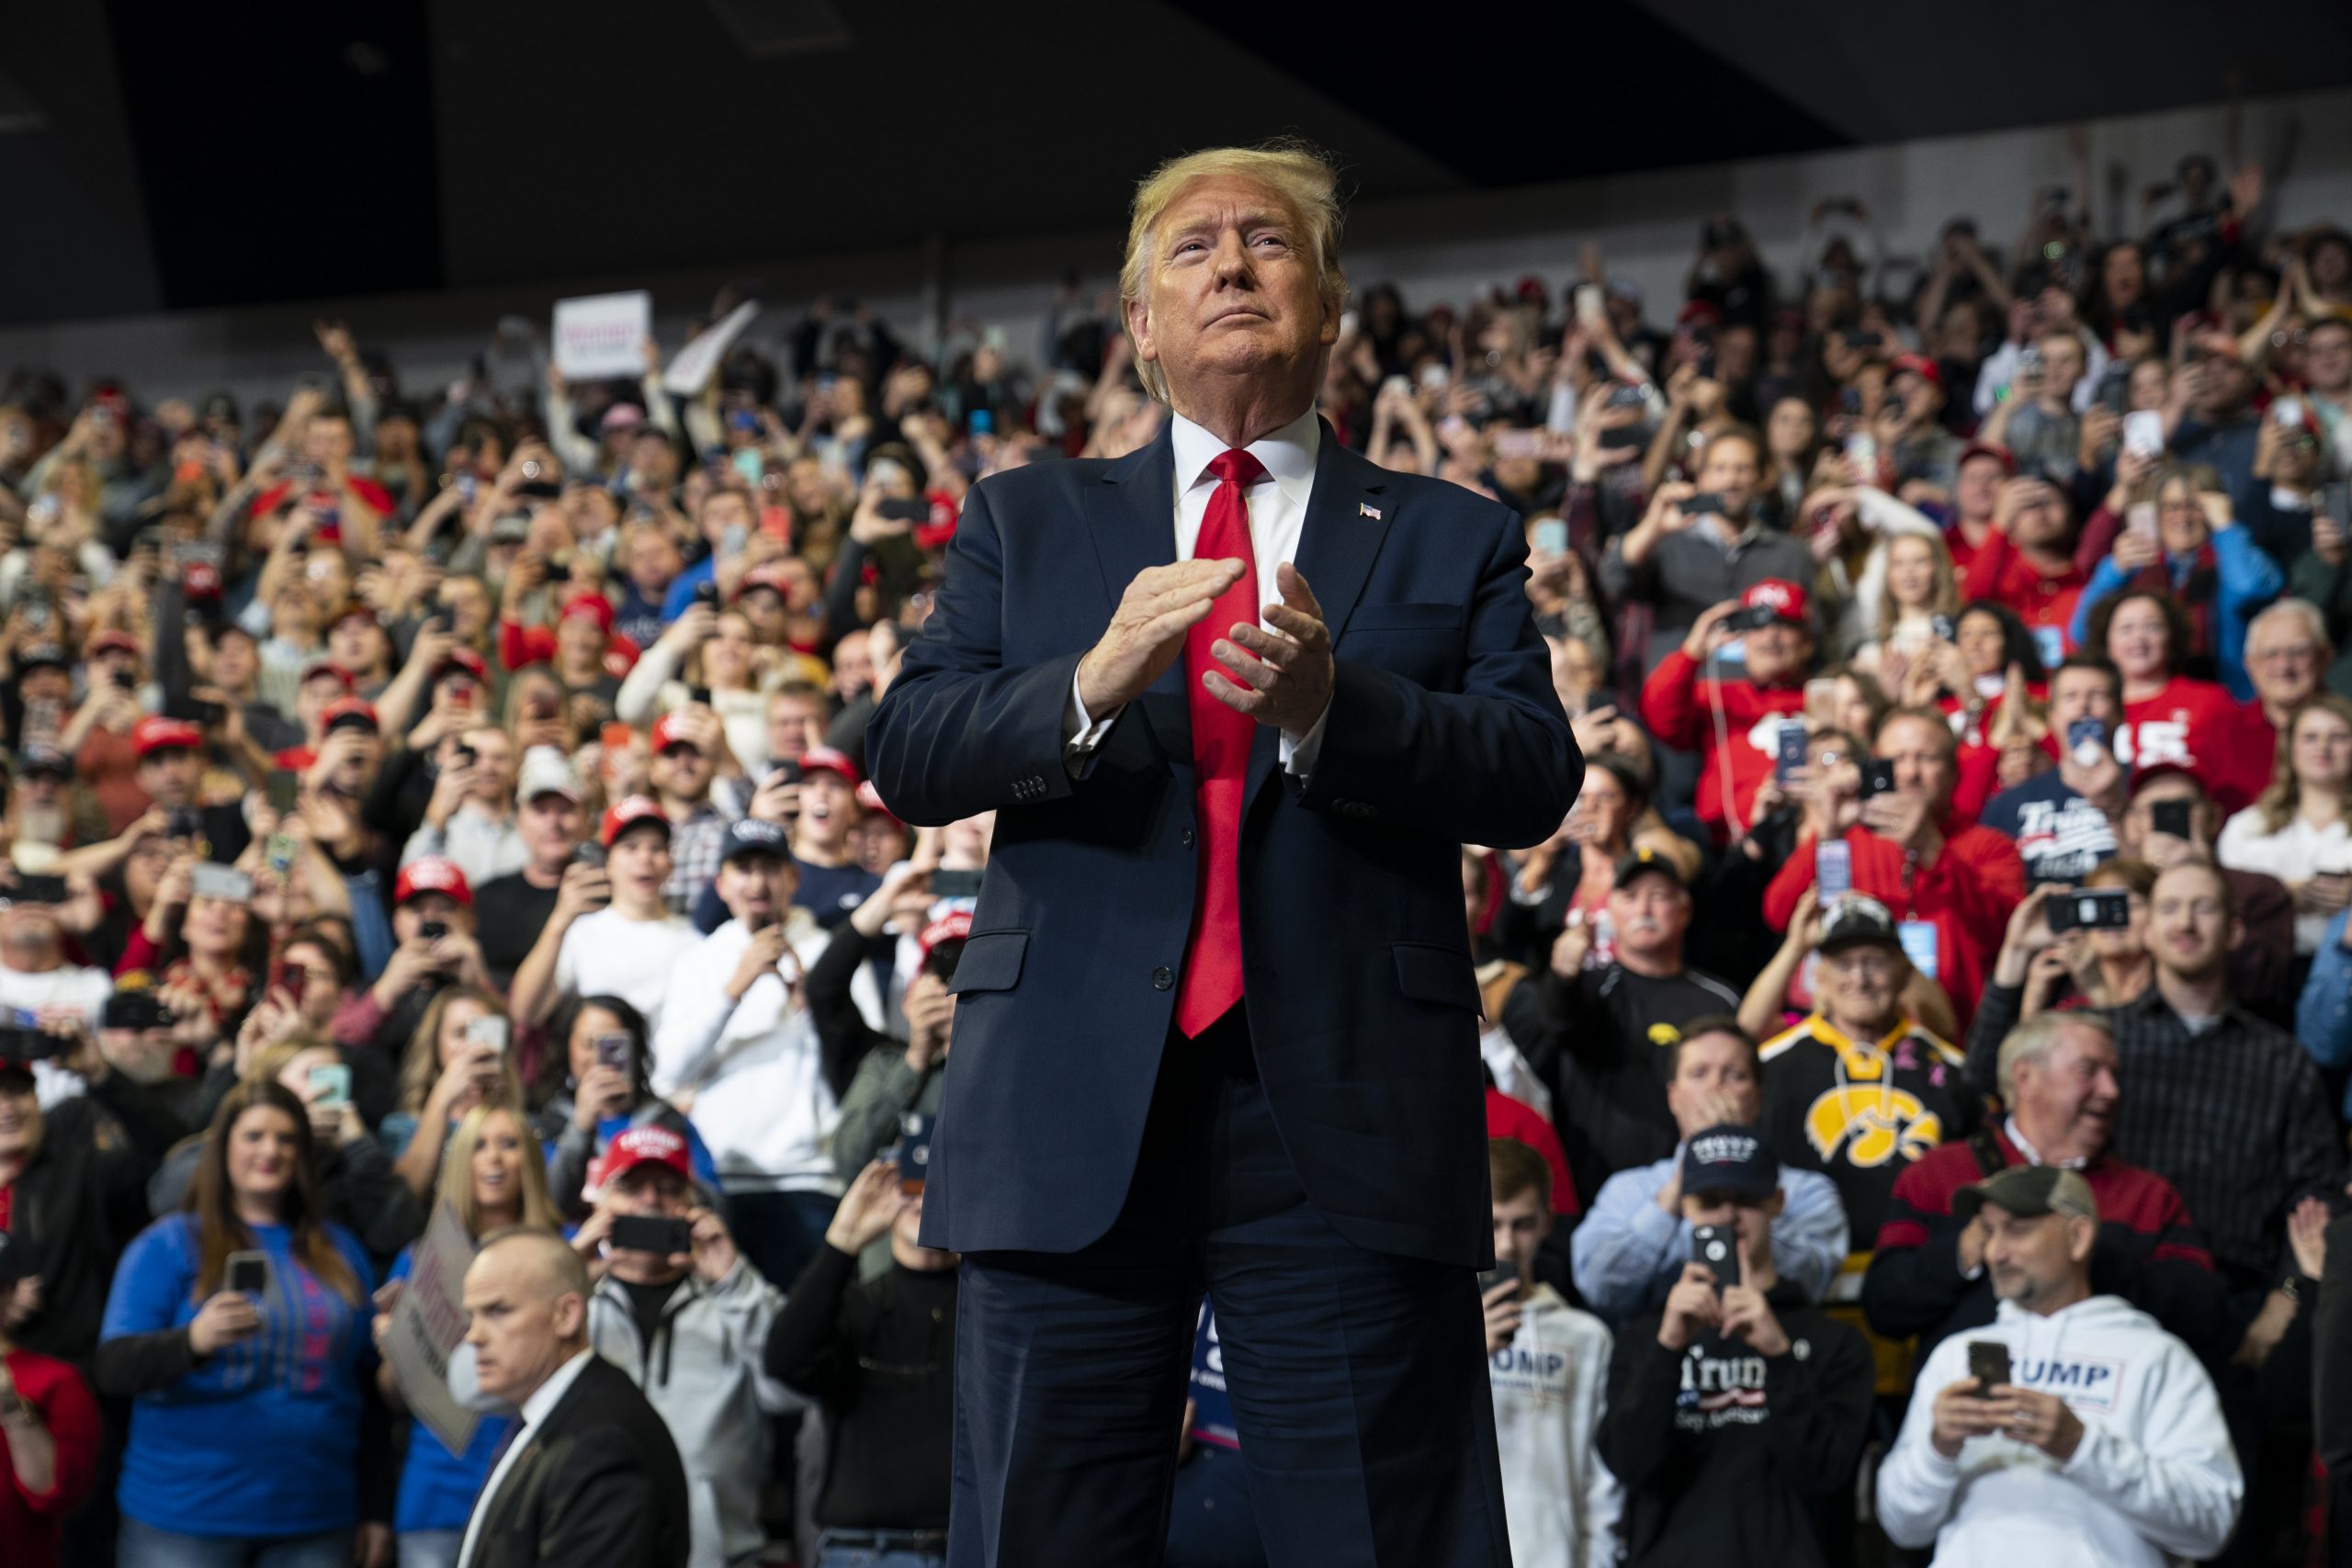 Trump campaign rolls out Iowa endorsements ahead of visit to early 2024